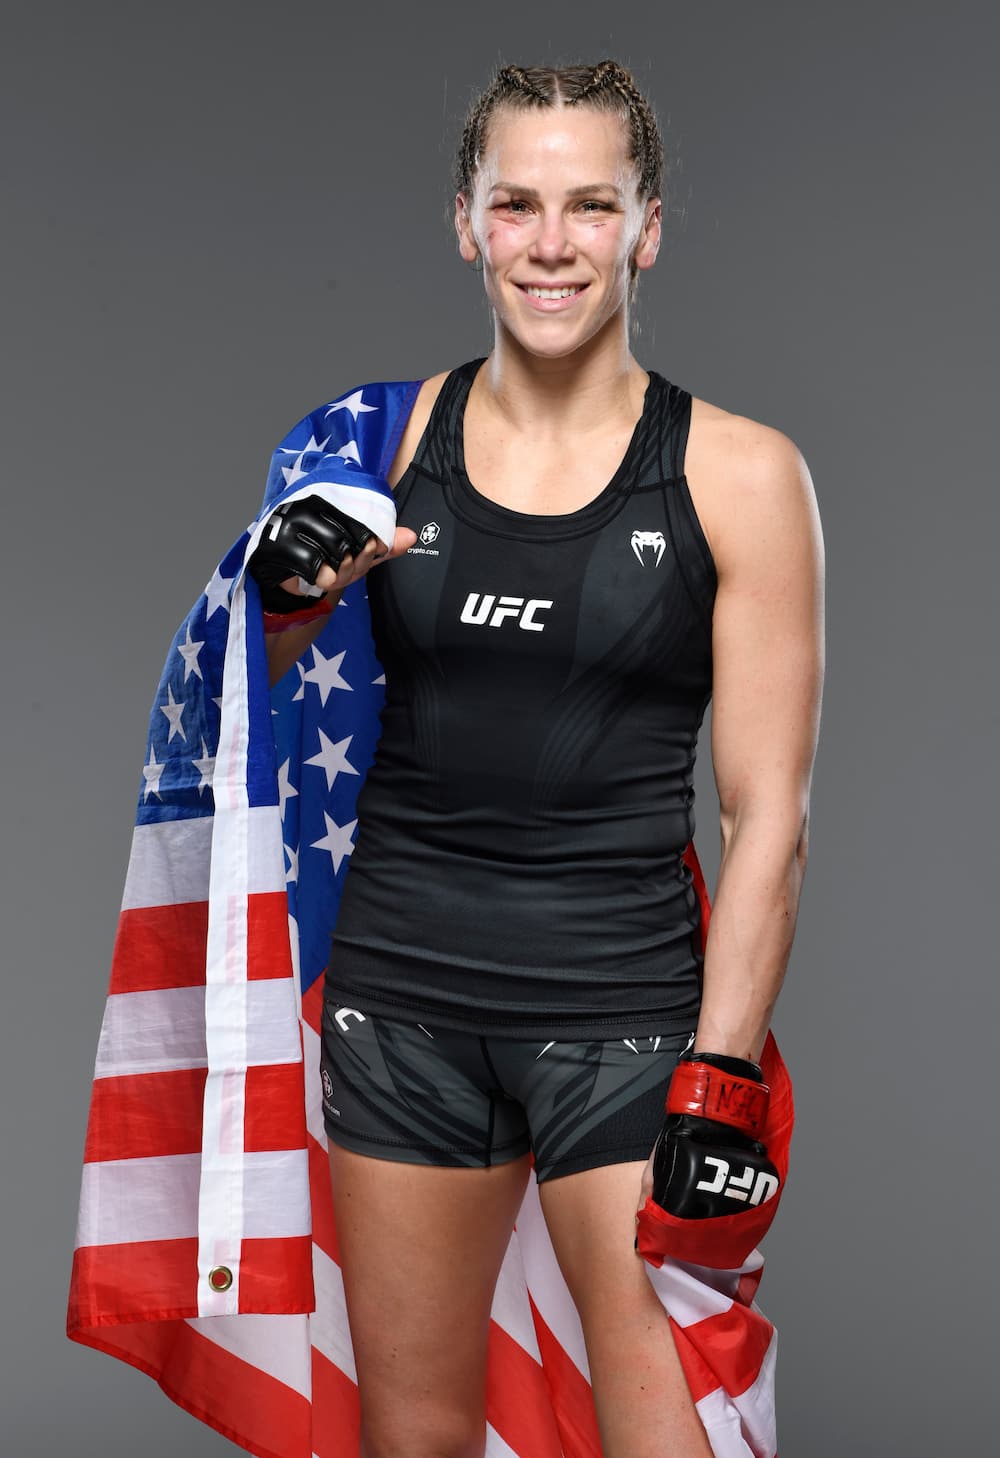 Who is the hottest girl UFC fighter?